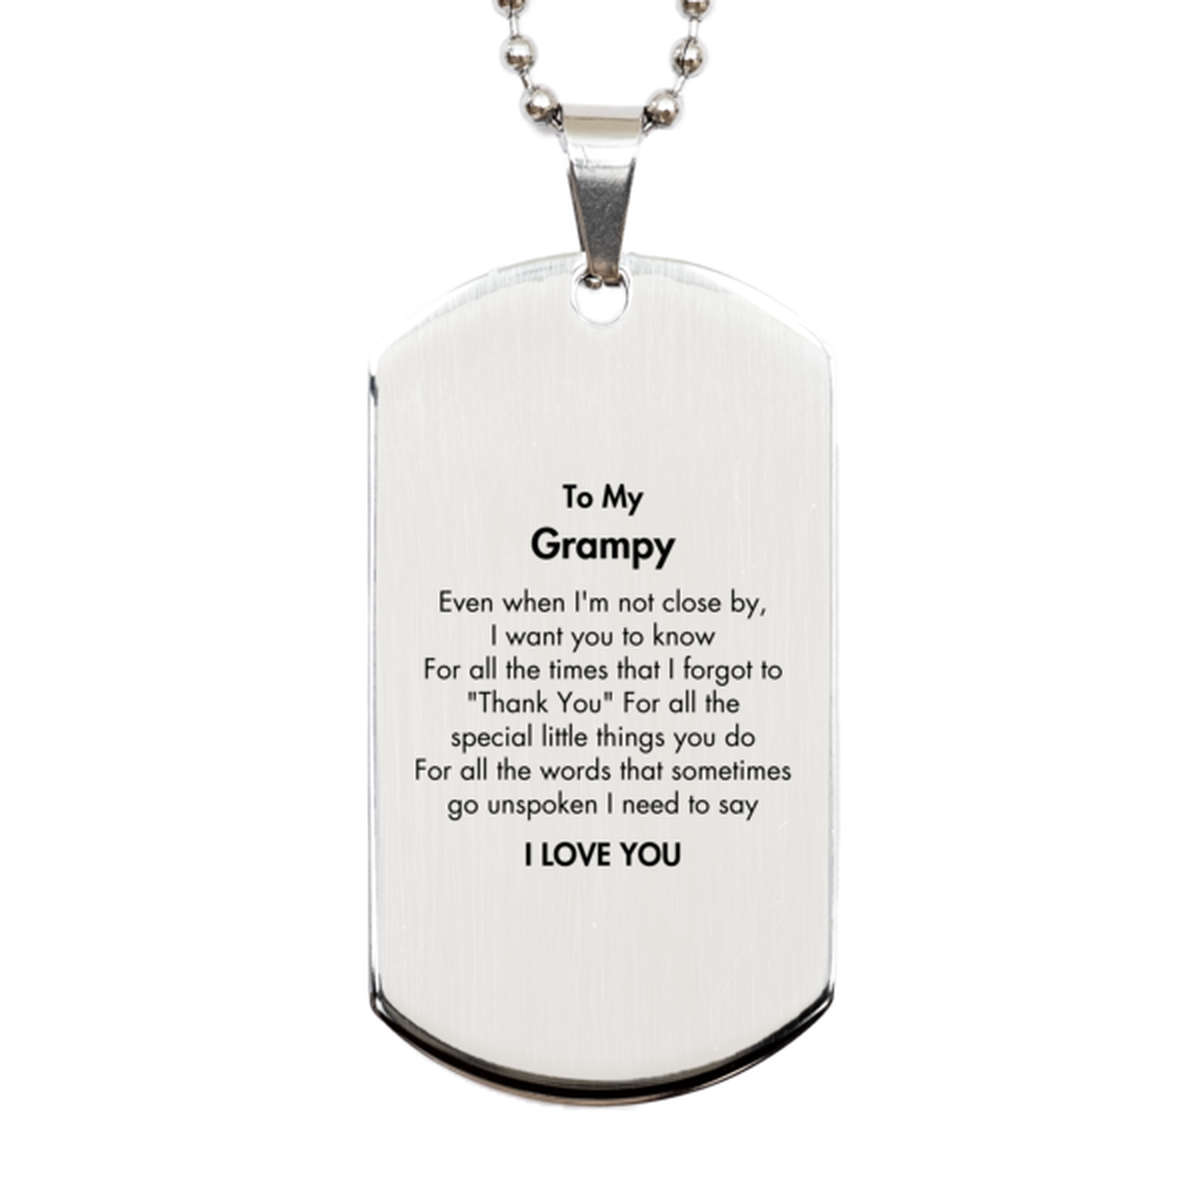 Thank You Gifts for Grampy, Keepsake Silver Dog Tag Gifts for Grampy Birthday Mother's day Father's Day Grampy For all the words That sometimes go unspoken I need to say I LOVE YOU